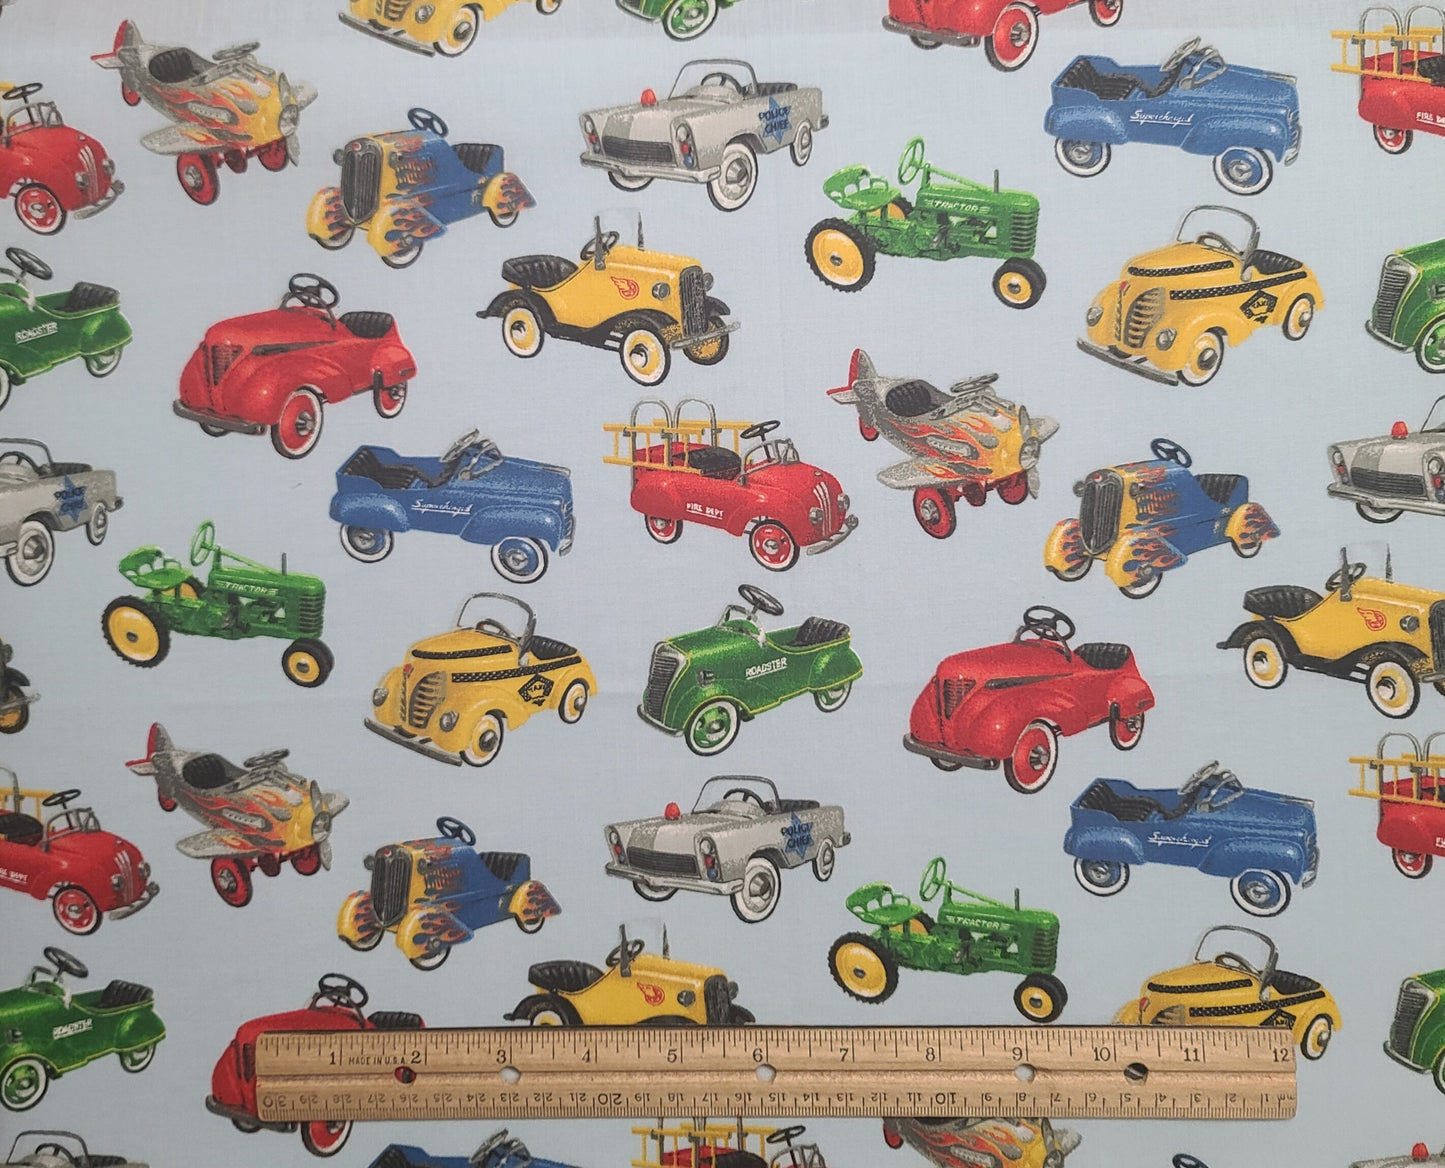 EOB - Patty Reed Designs 2010 Fabric Traditions - Sky Blue Fabric / Vintage Pedal Car, Train, Tractor Print